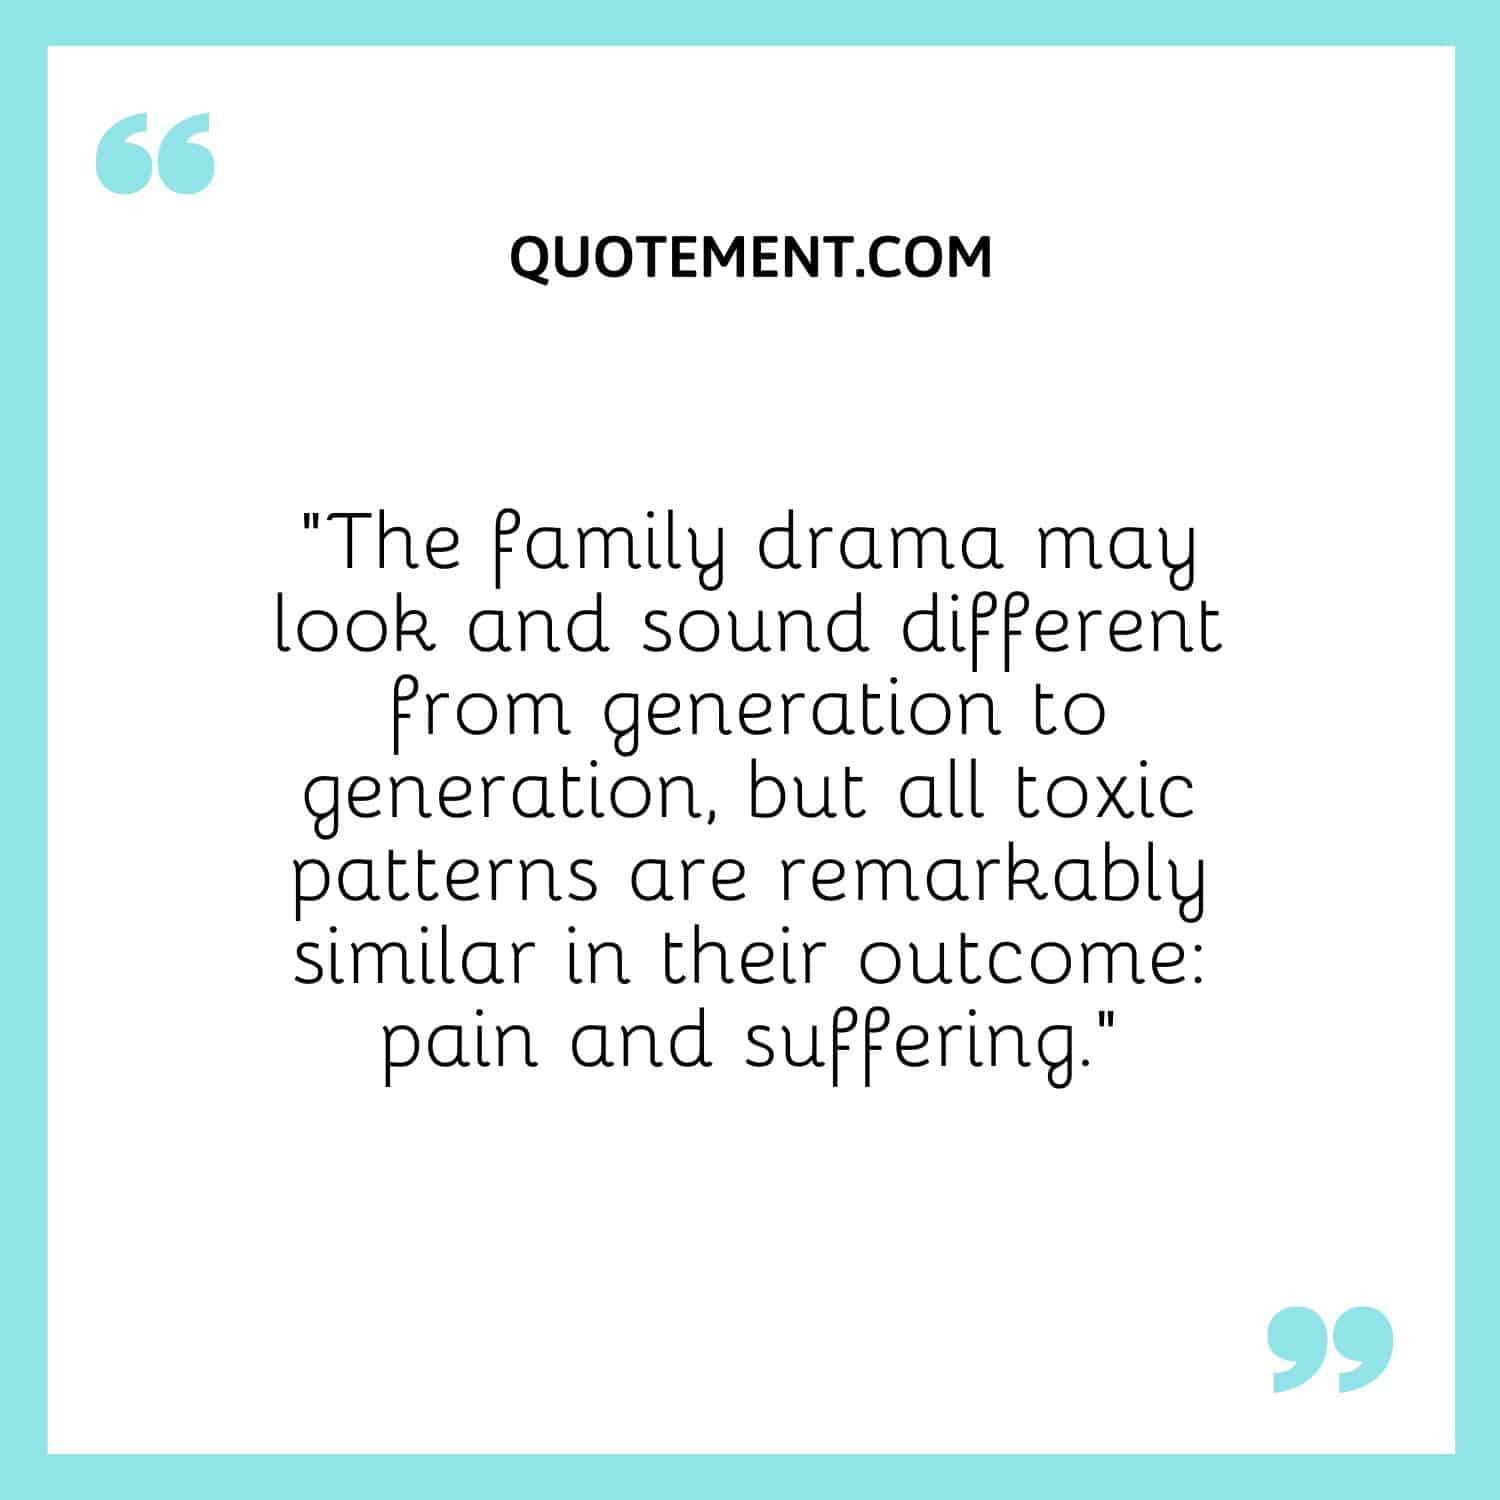 The family drama may look and sound different from generation to generation